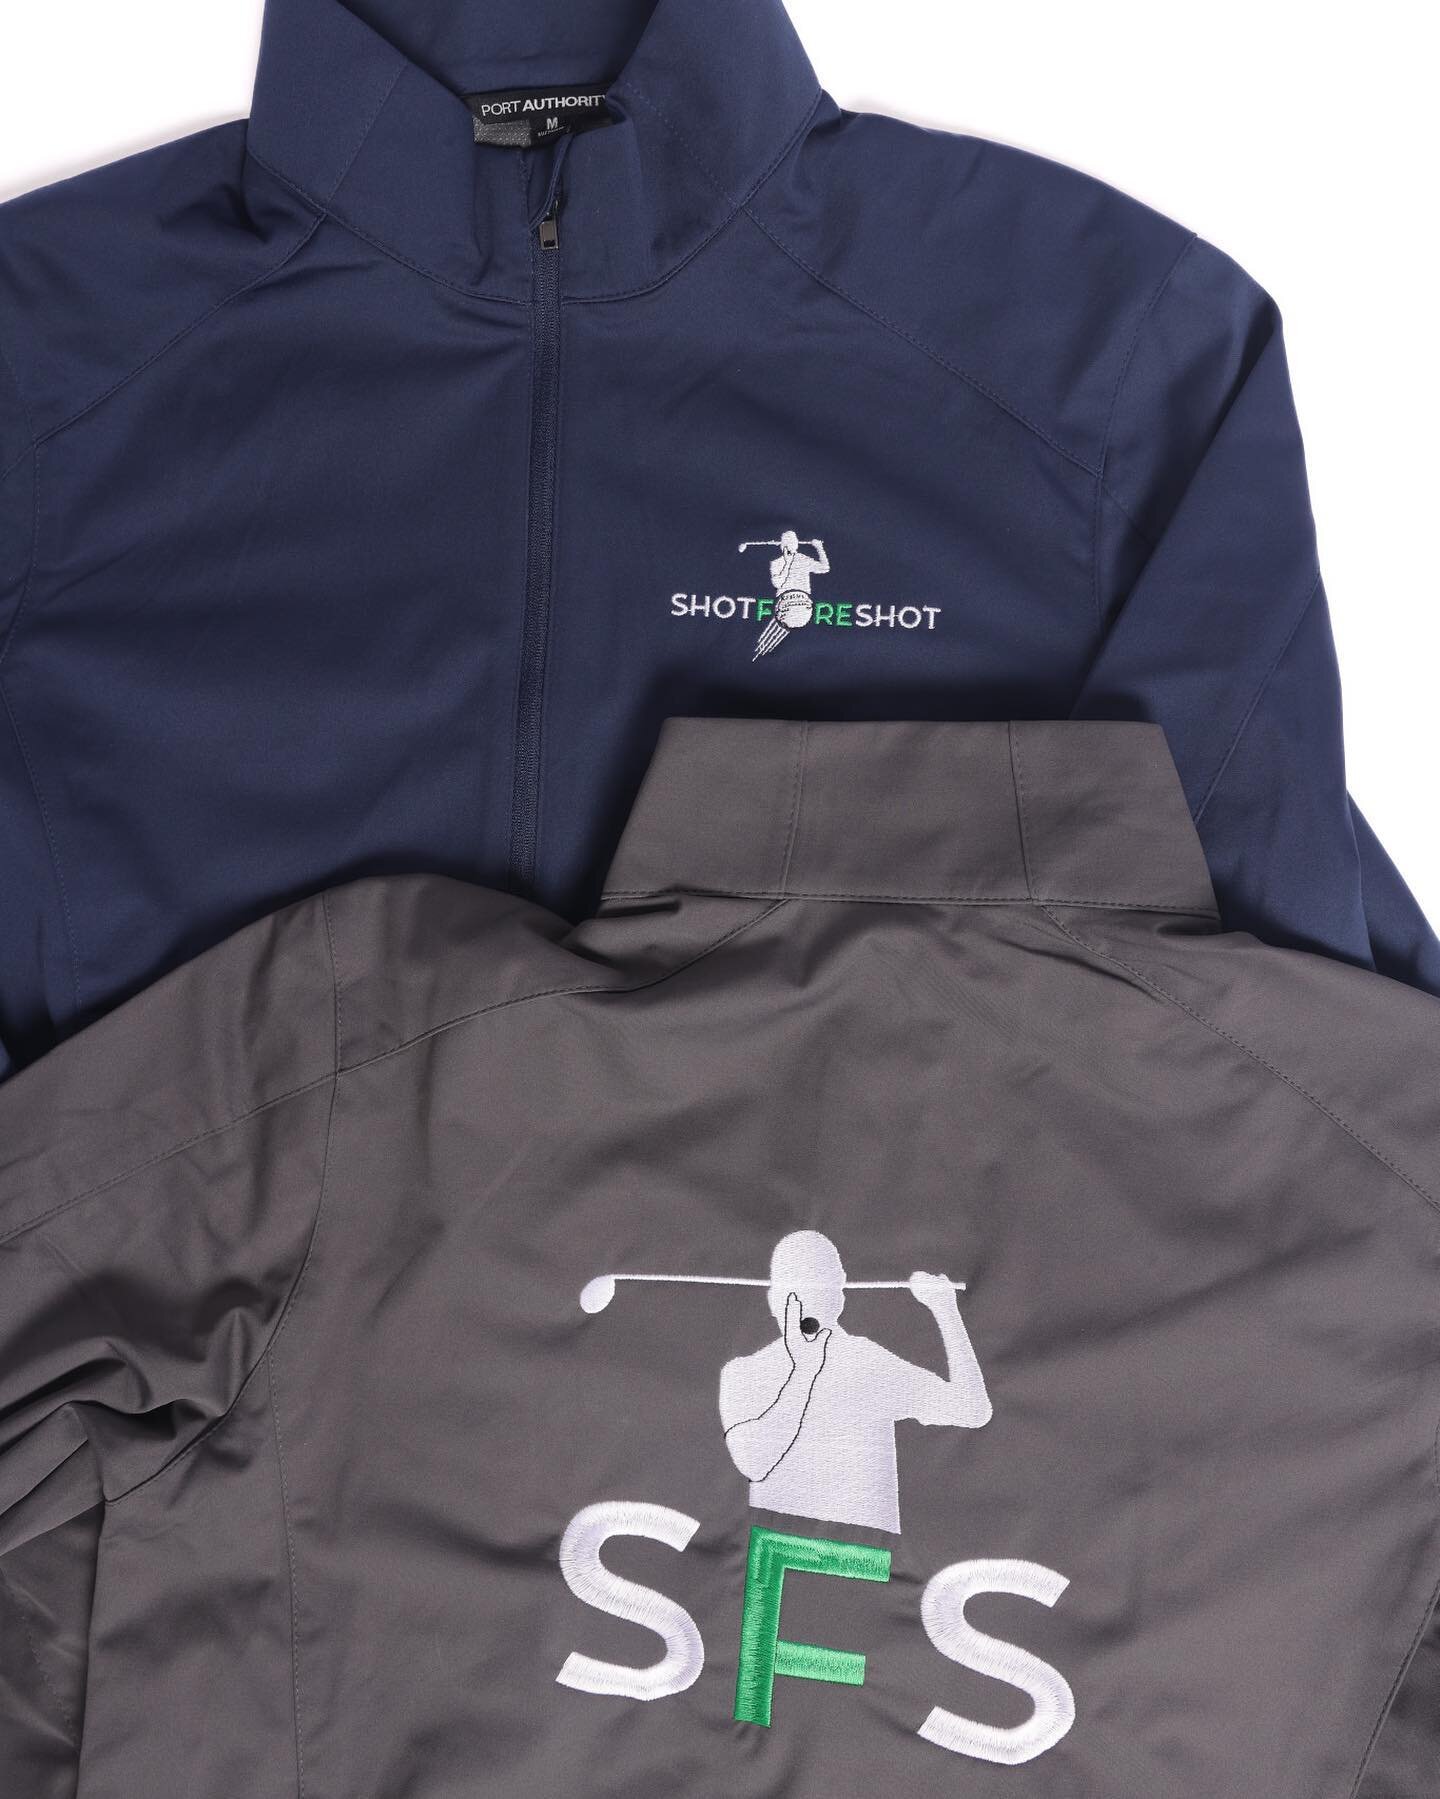 That Sunday Shot Fore Shot style, though.🙌🏾 
Do you have a golf jacket yet? ⛳️

👉🏾This long-sleeve lightweight jacket embroidered with the Shot Fore Shot Logo is available in two colors!🔥

☝🏾Water-resistant shell
☝🏾Breathable mesh liner
☝🏾100